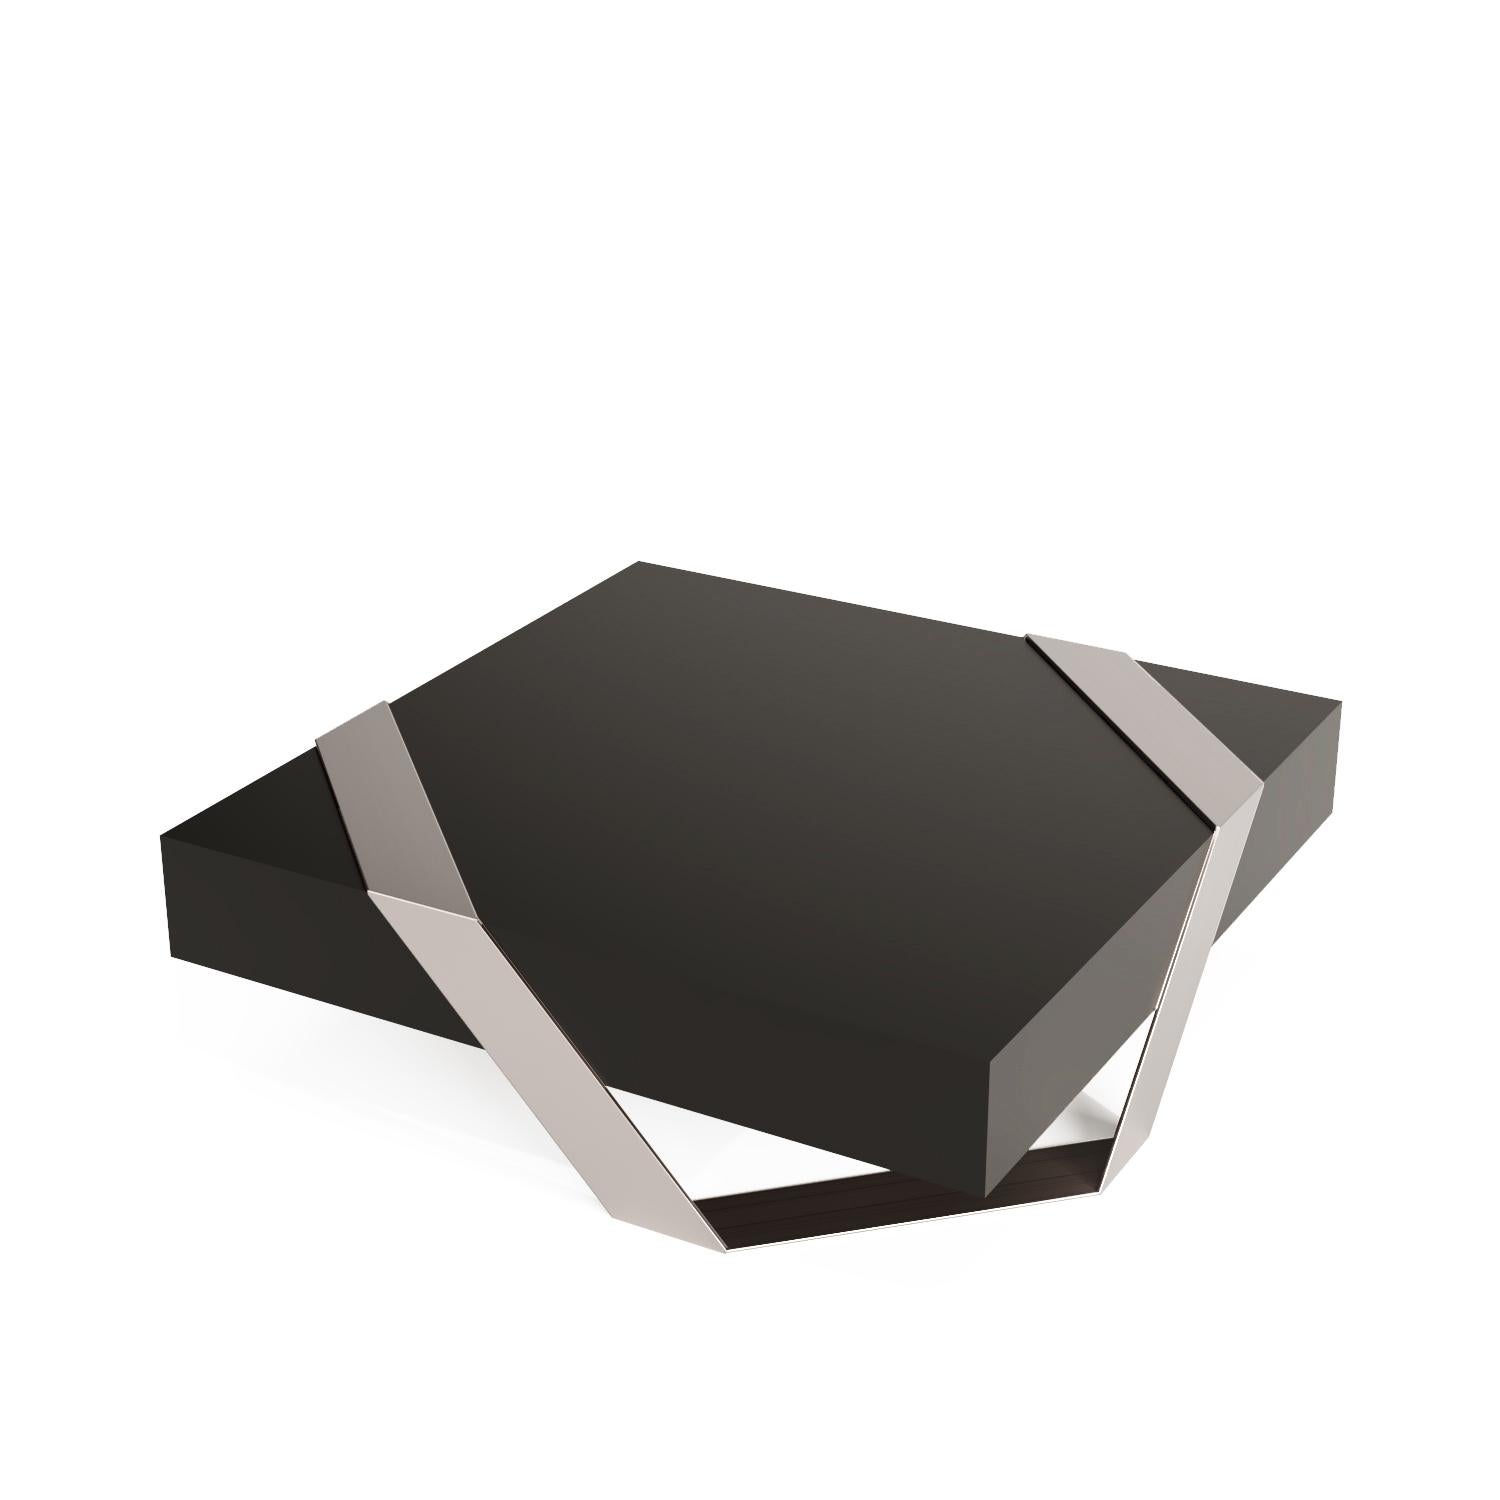 Portuguese Modern Minimalist Square Coffee Table Black Lacquer Brushed Stainless Steel For Sale